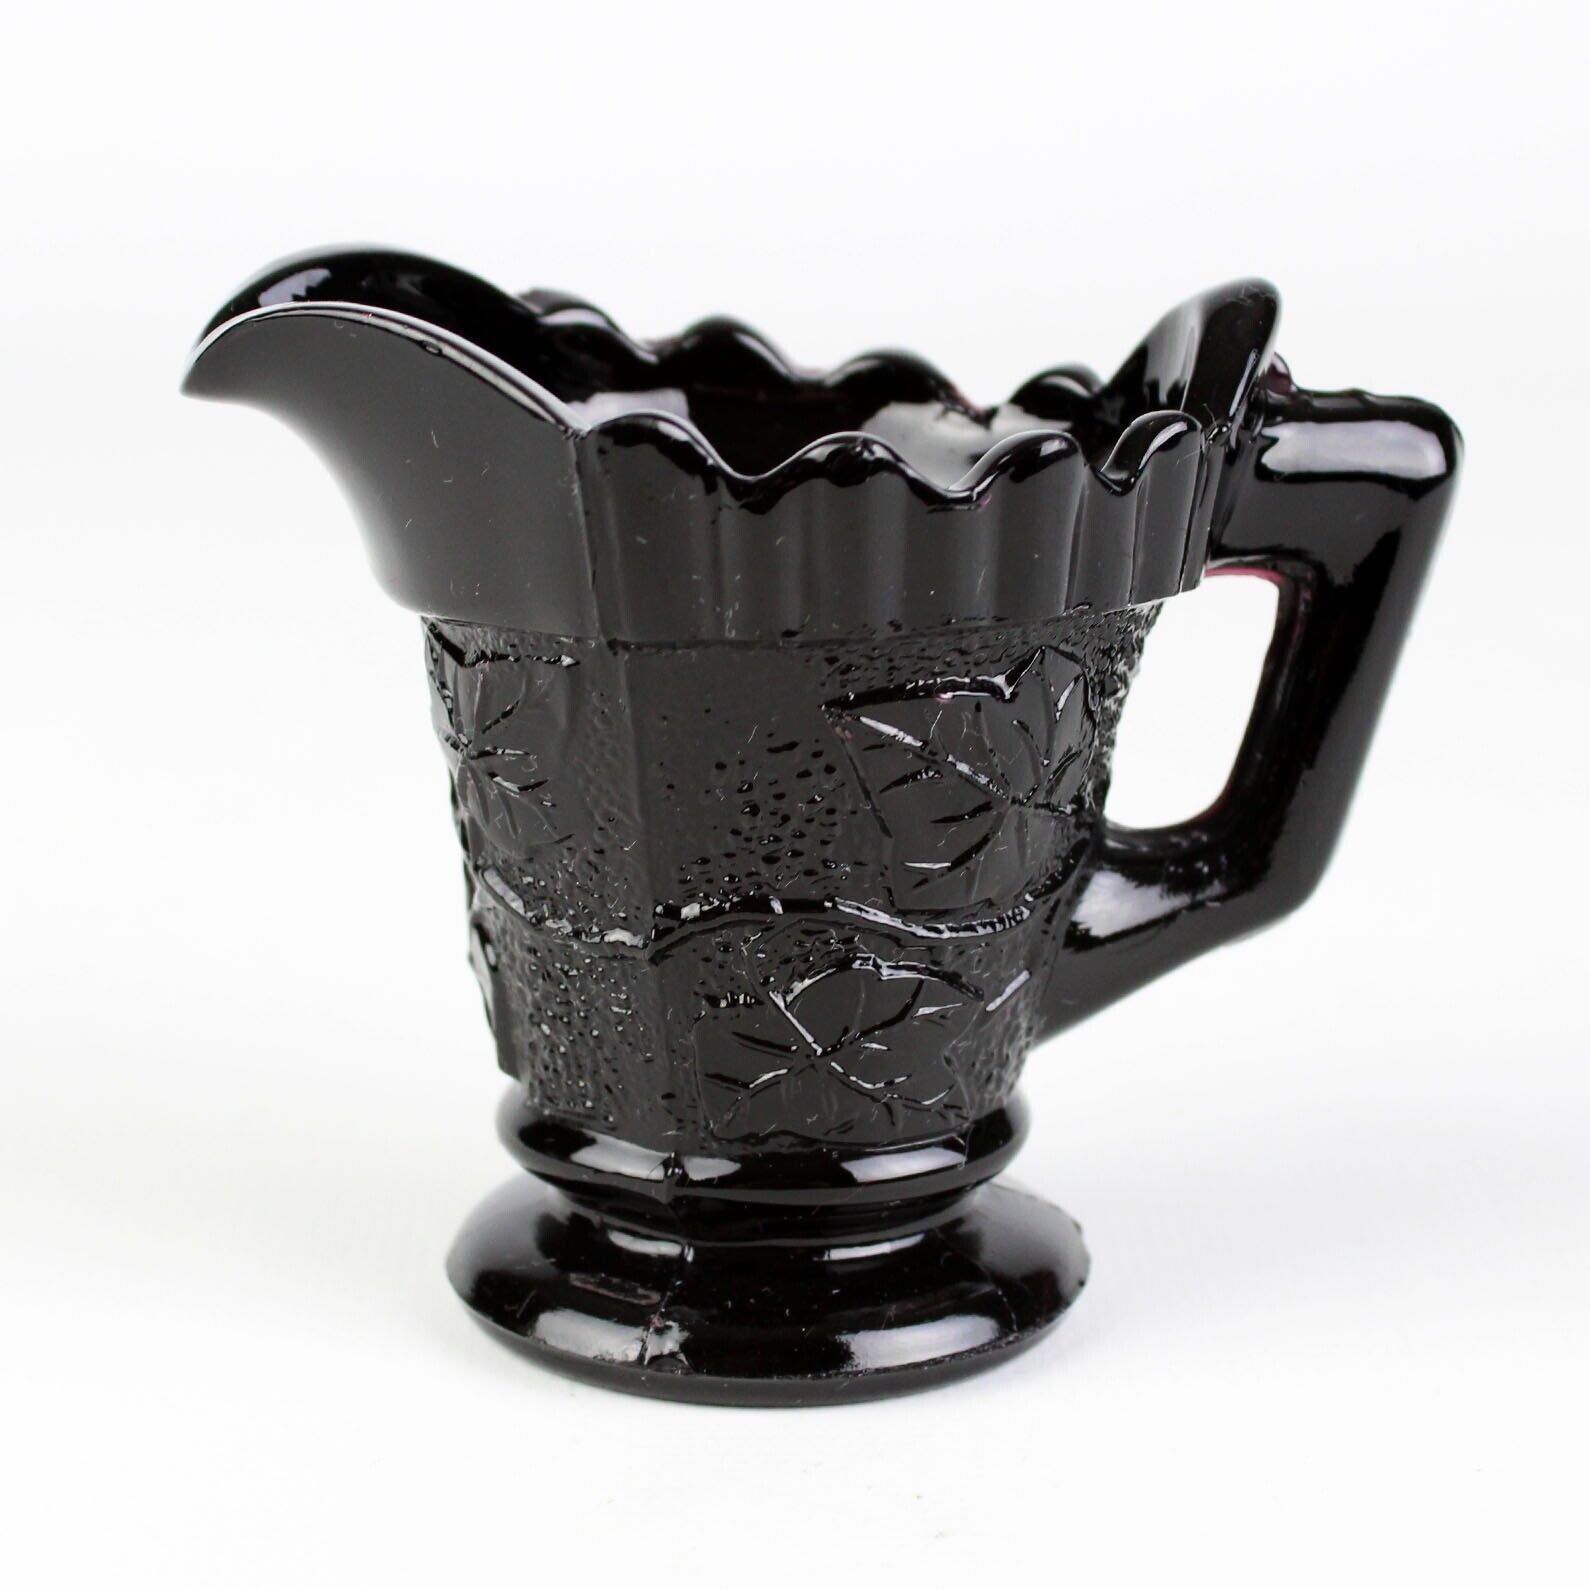 Primary image for Sandwich Ivy Black Amethyst Small Creamer, Antique Flint Glass c.1840s 2 3/4"